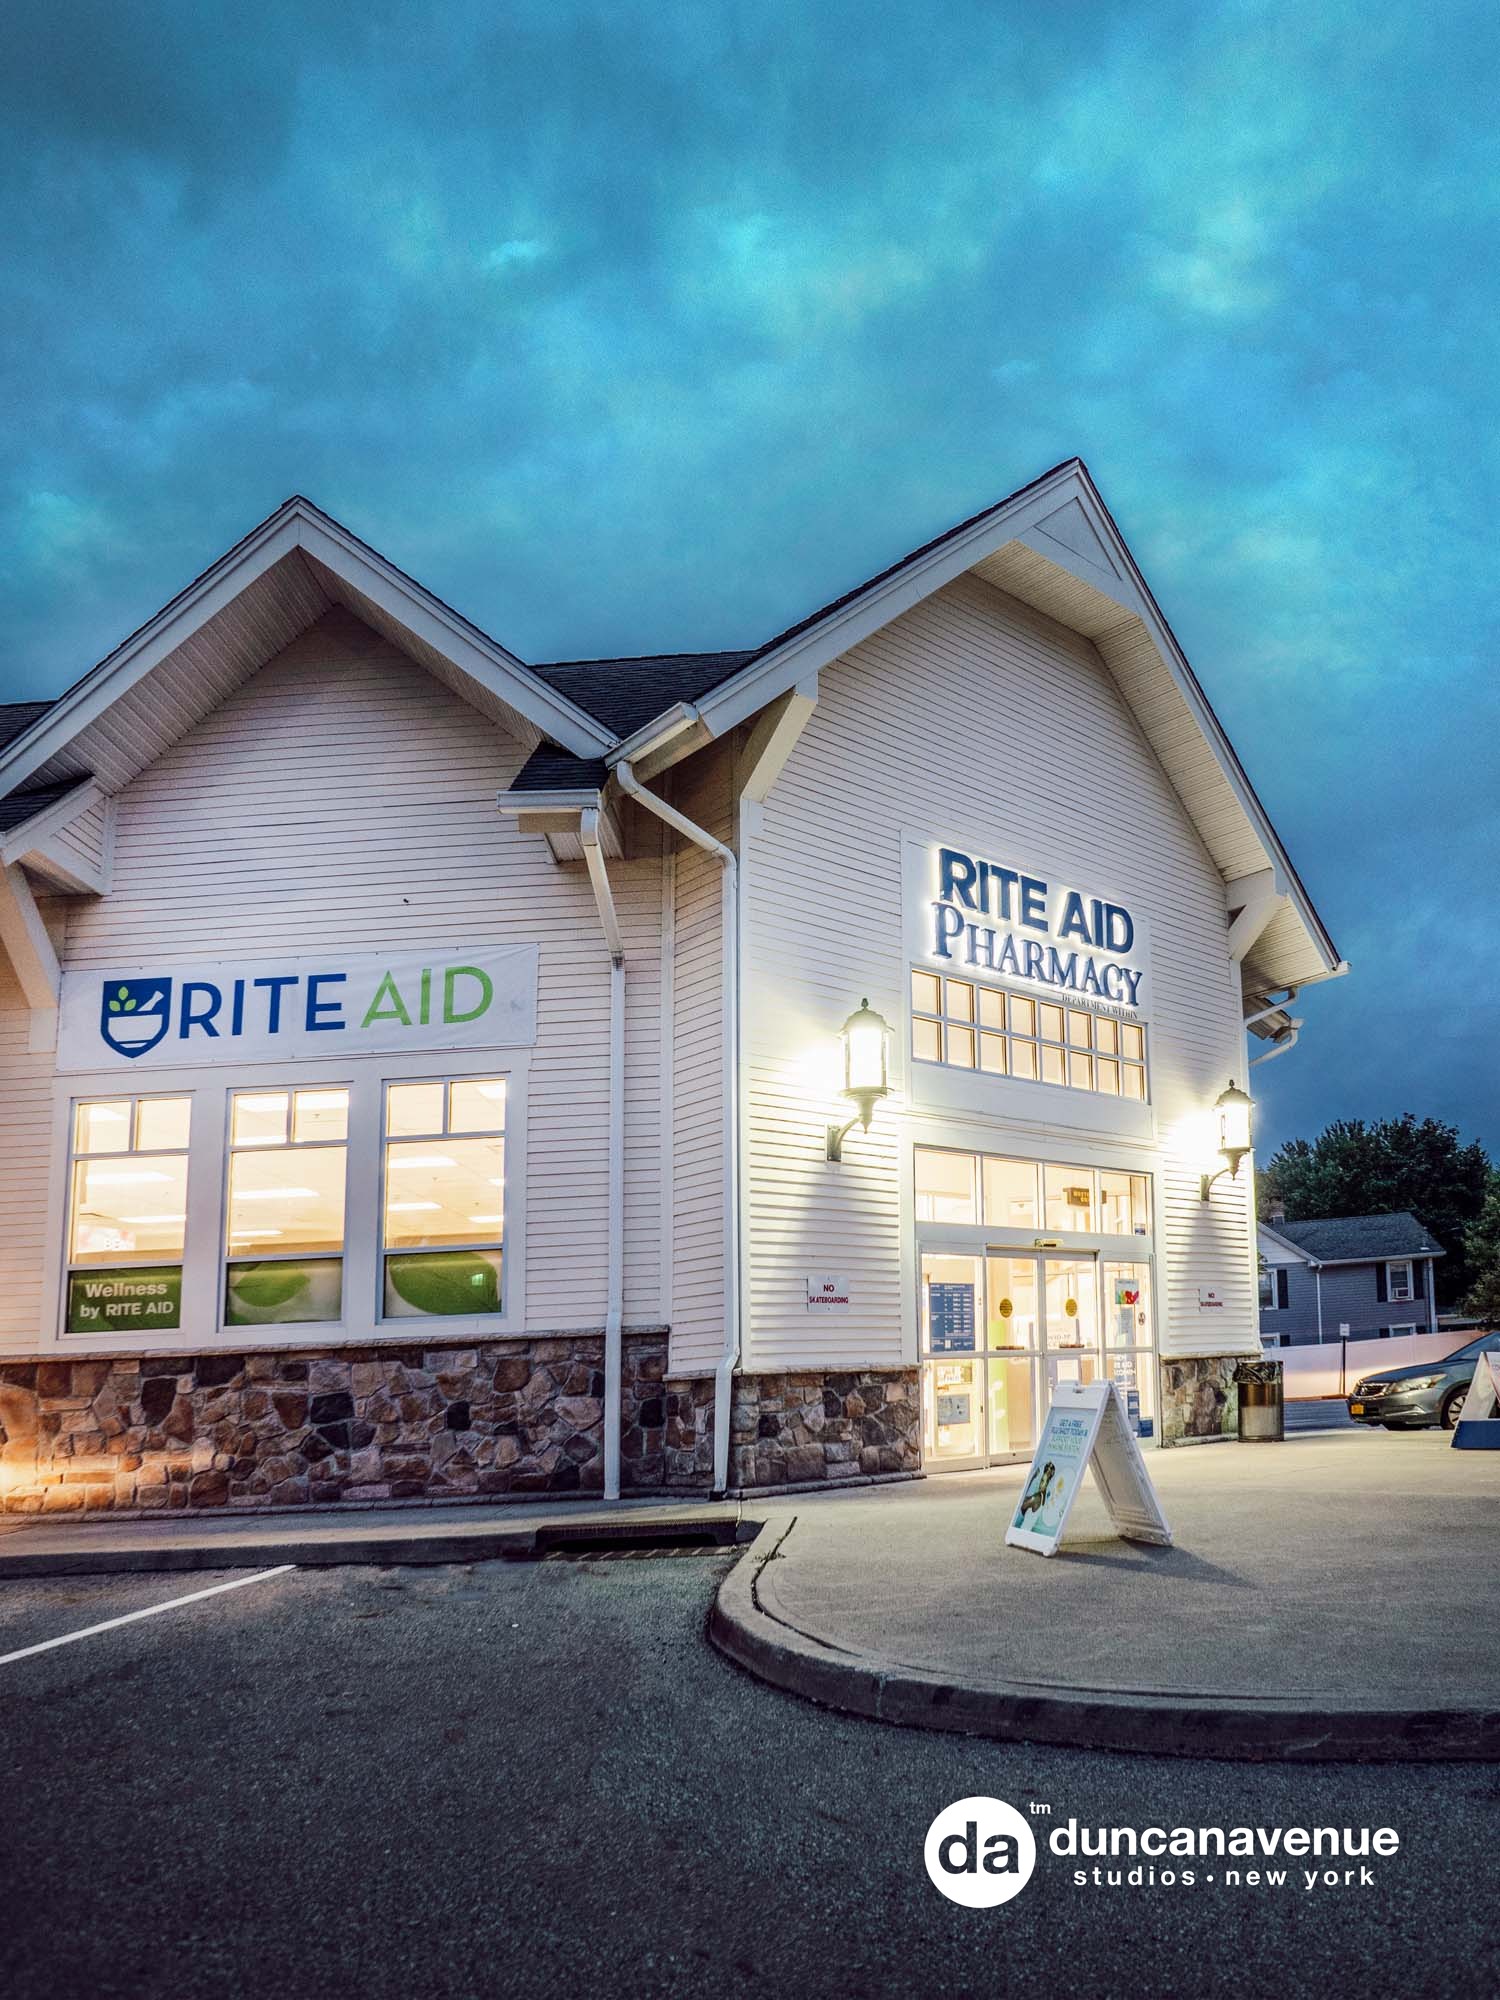 Rite Aid Hyde Park, NY – Commercial Real Estate Photography Project by Duncan Avenue Studios – Hudson Valley, Catskills, and Westchester, New York